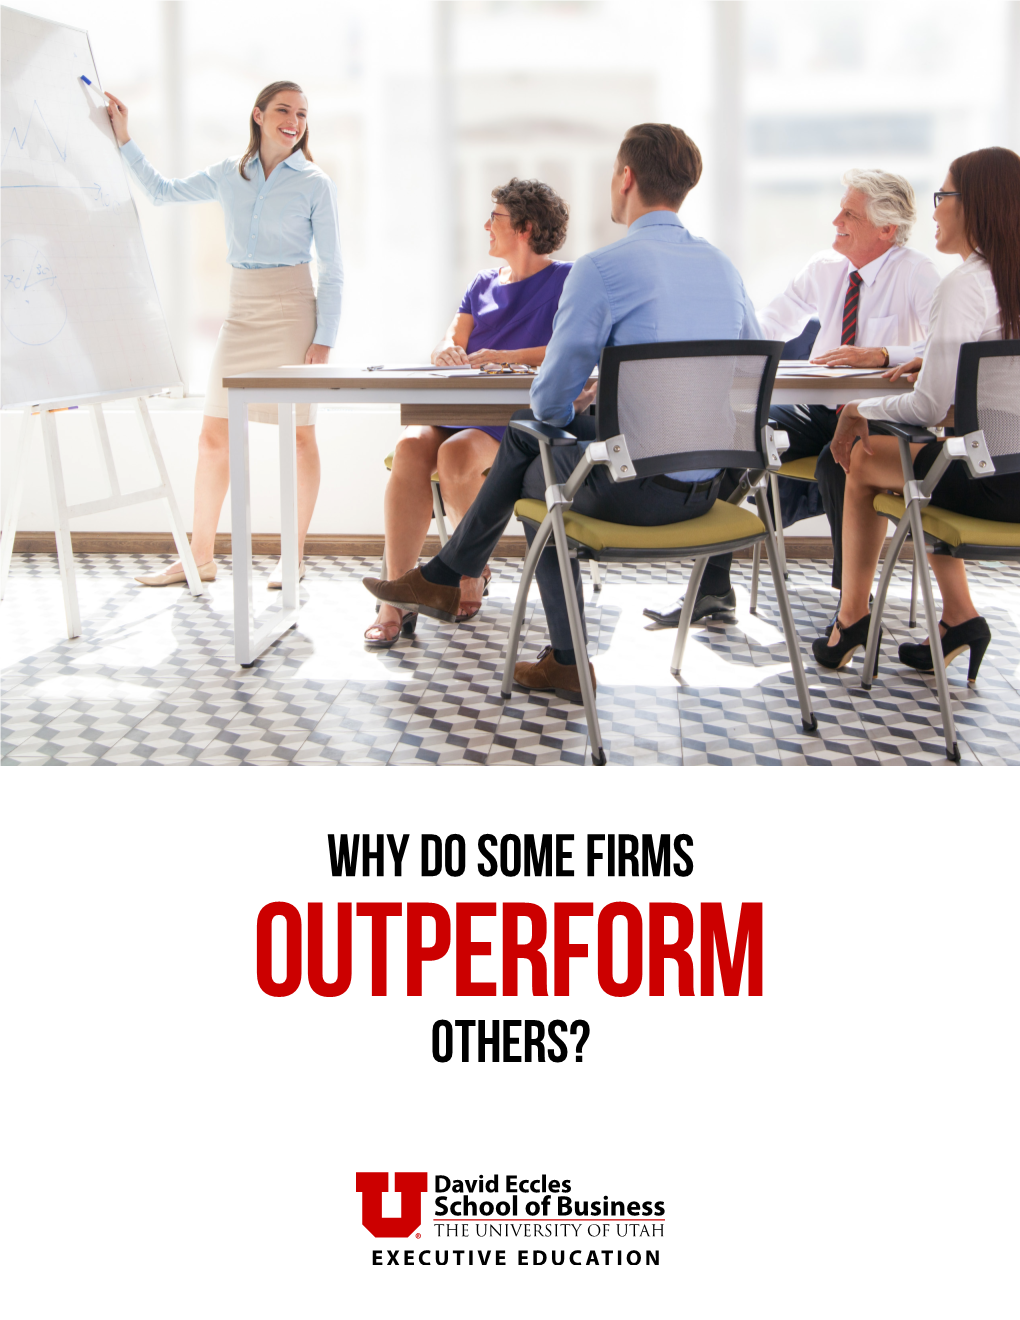 Others? WHY DO SOME Firms OUTPERFORM Others?